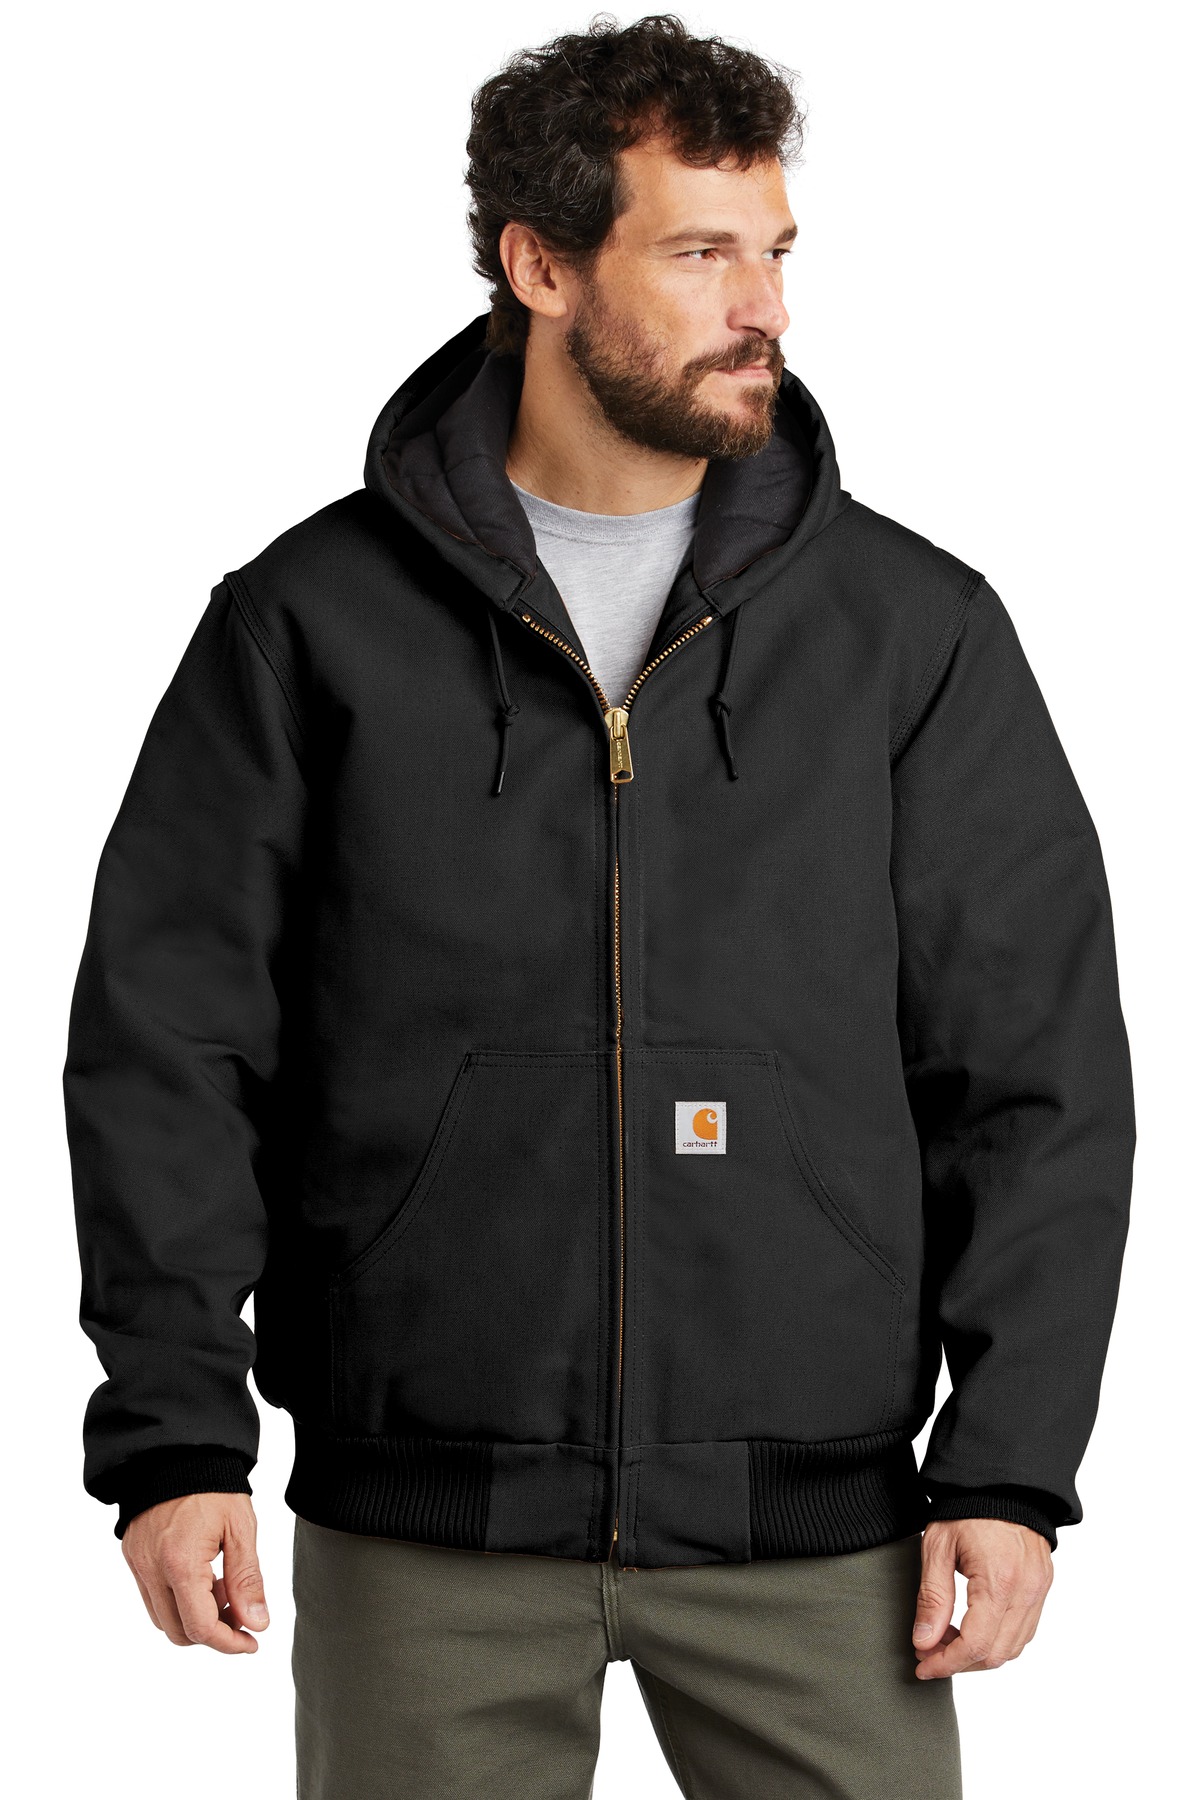 Carhartt Quilted-Flannel-Lined Duck Active Jac-Carhartt